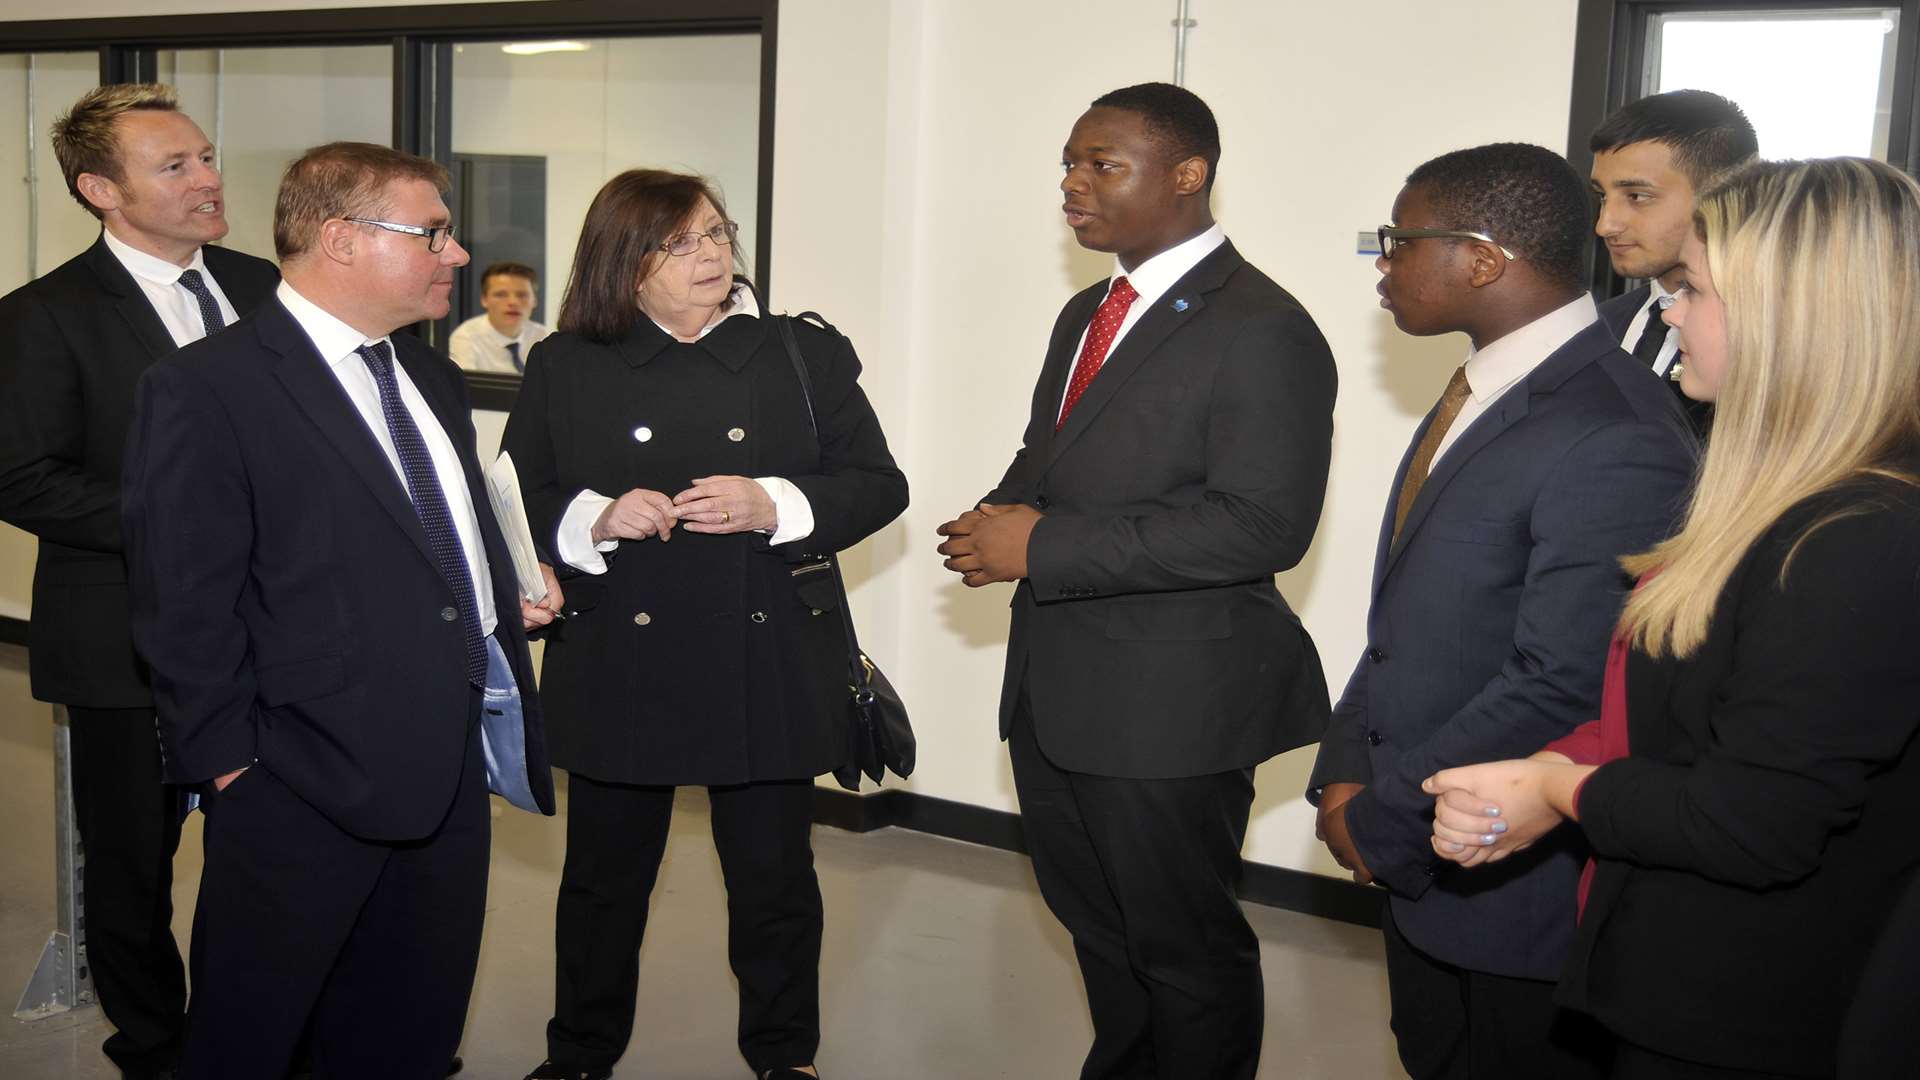 From left, Medway Council's regeneration director Richard Hicks, Minister Mark Francois and Medway Council's economic development chief Cllr Jane Chitty talk to students at Medway UTC